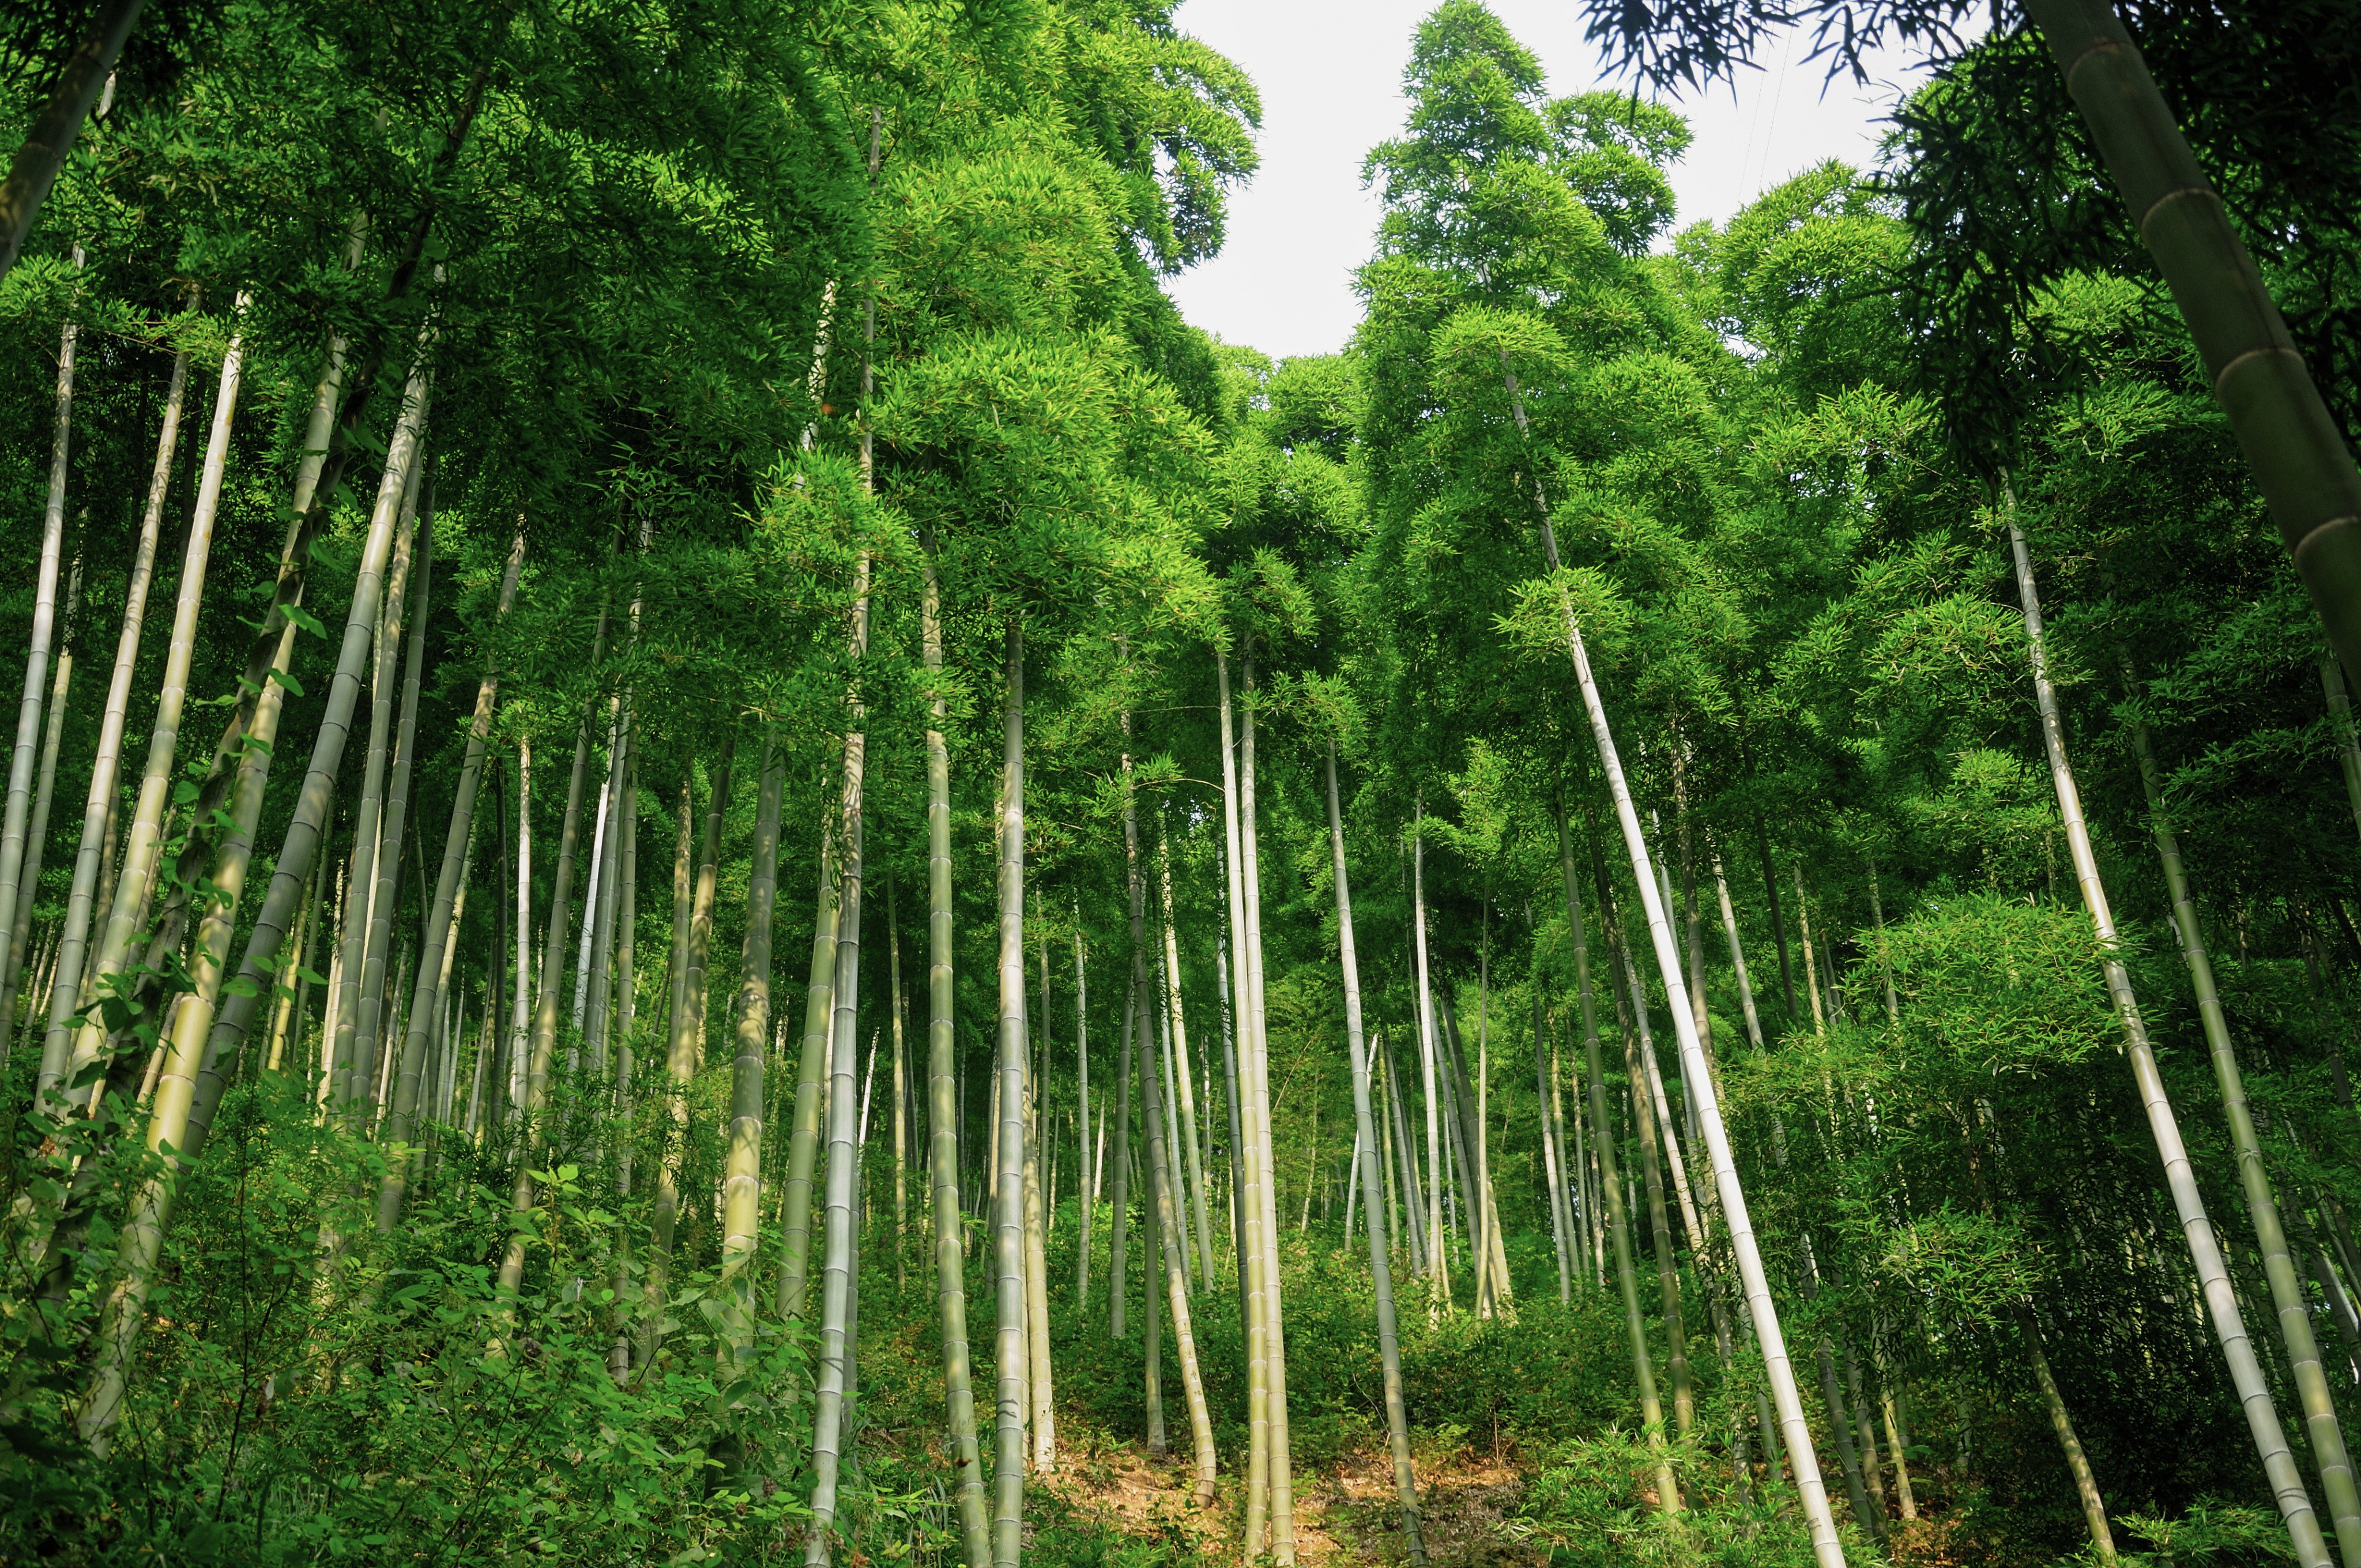 As a crop, bamboo is fast-growing, plus has multiple uses including as food and timber. Photo: Shutterstock
